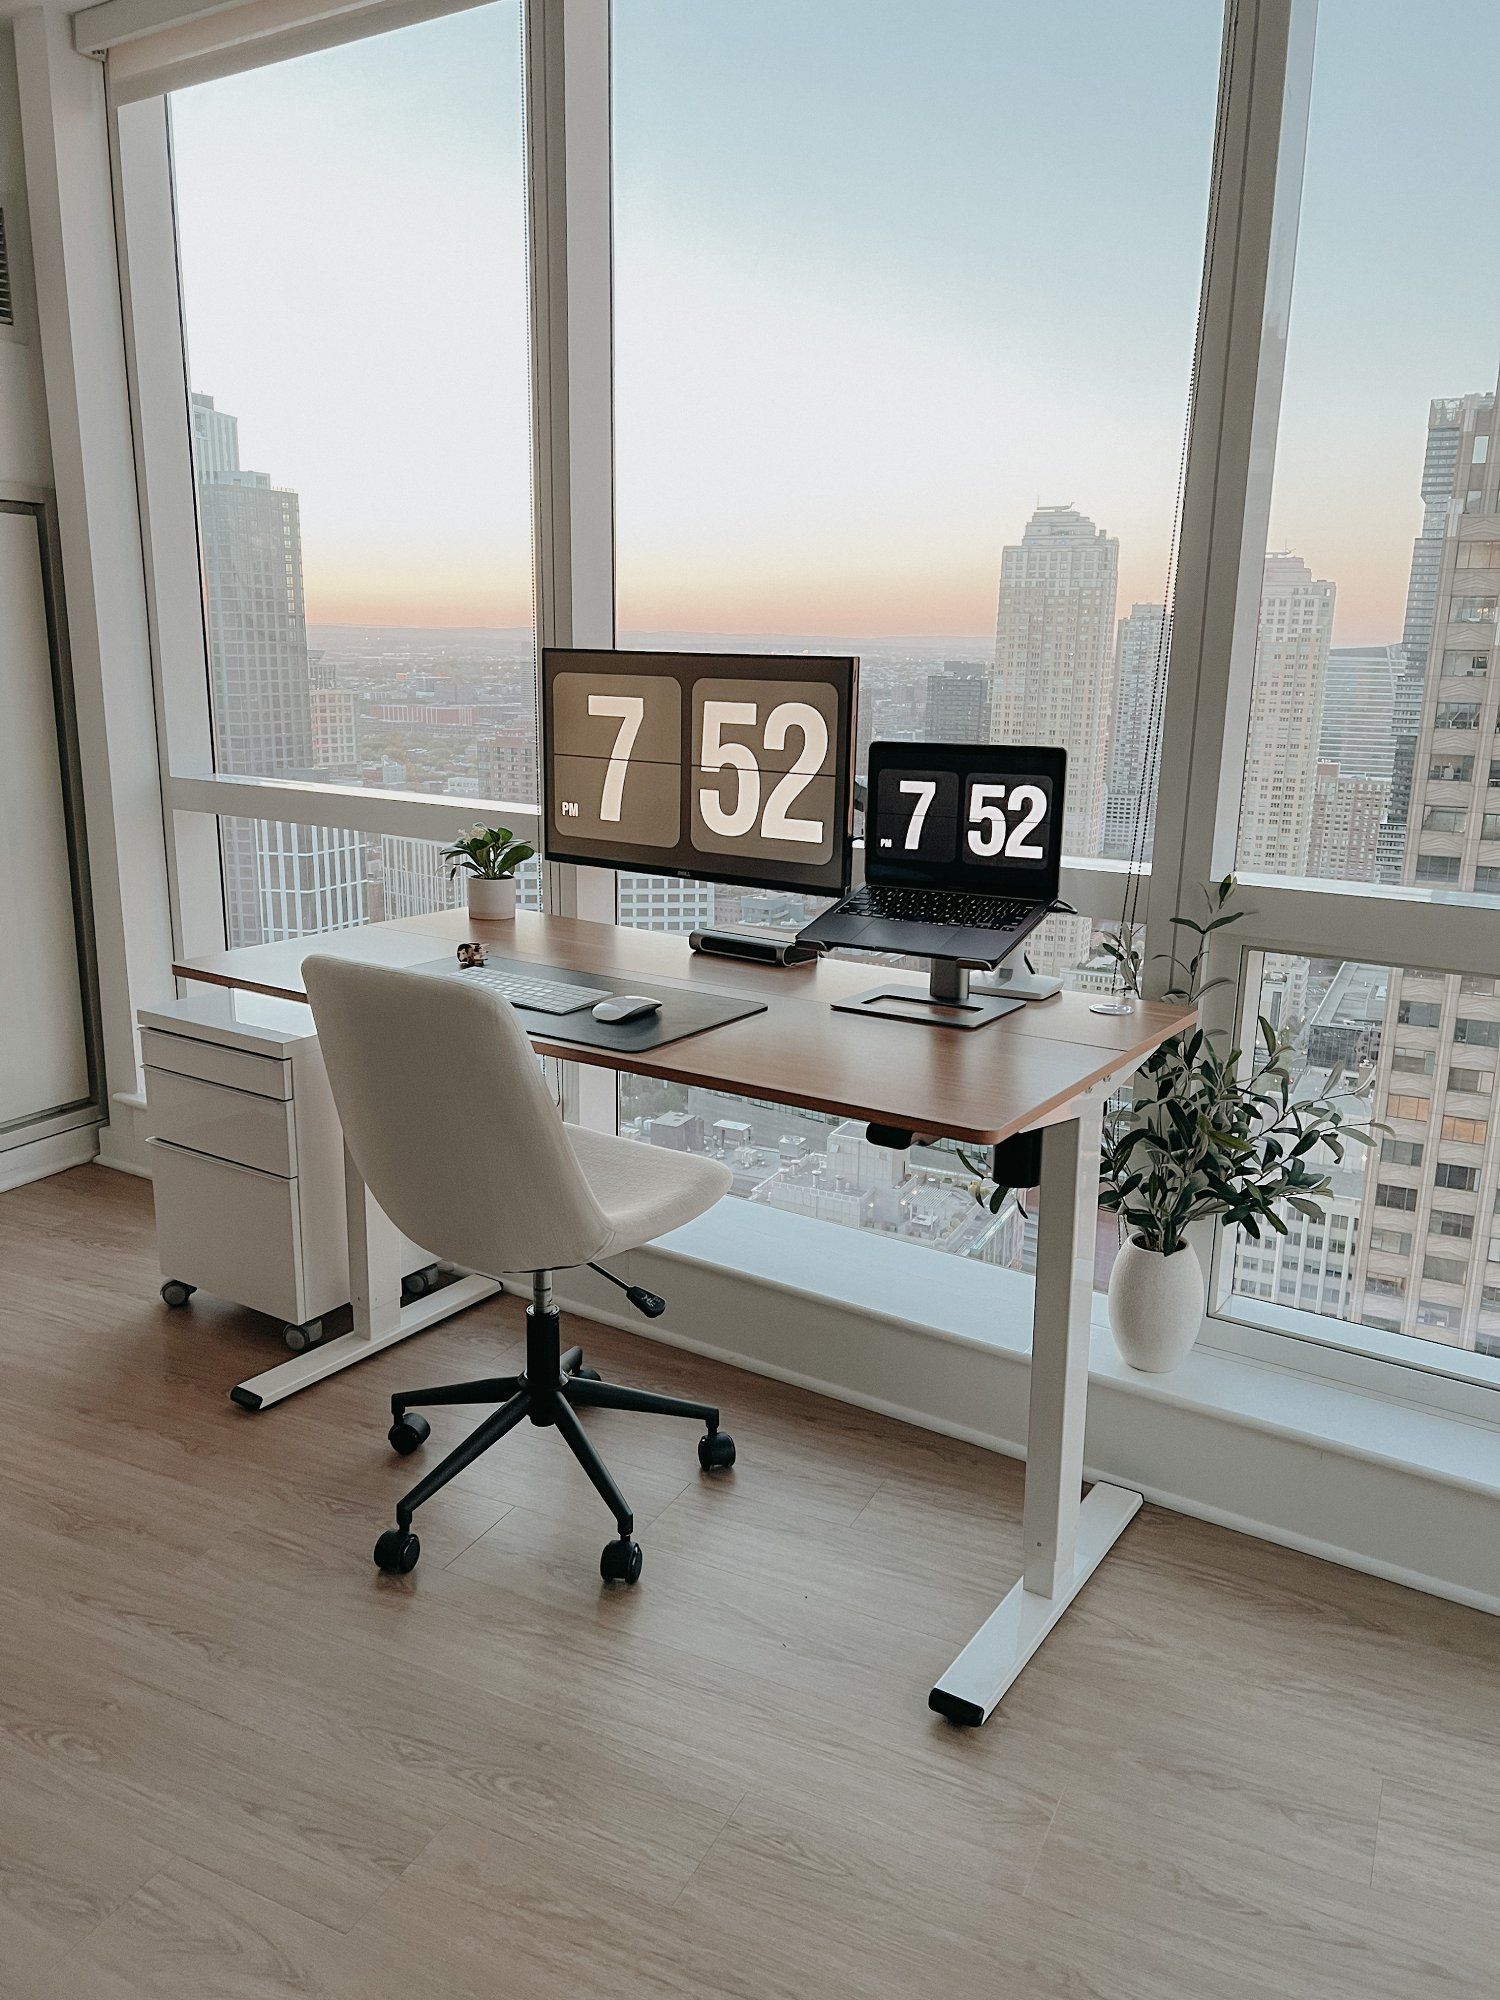 A clean and ergonomic desk setup with panoramic city views